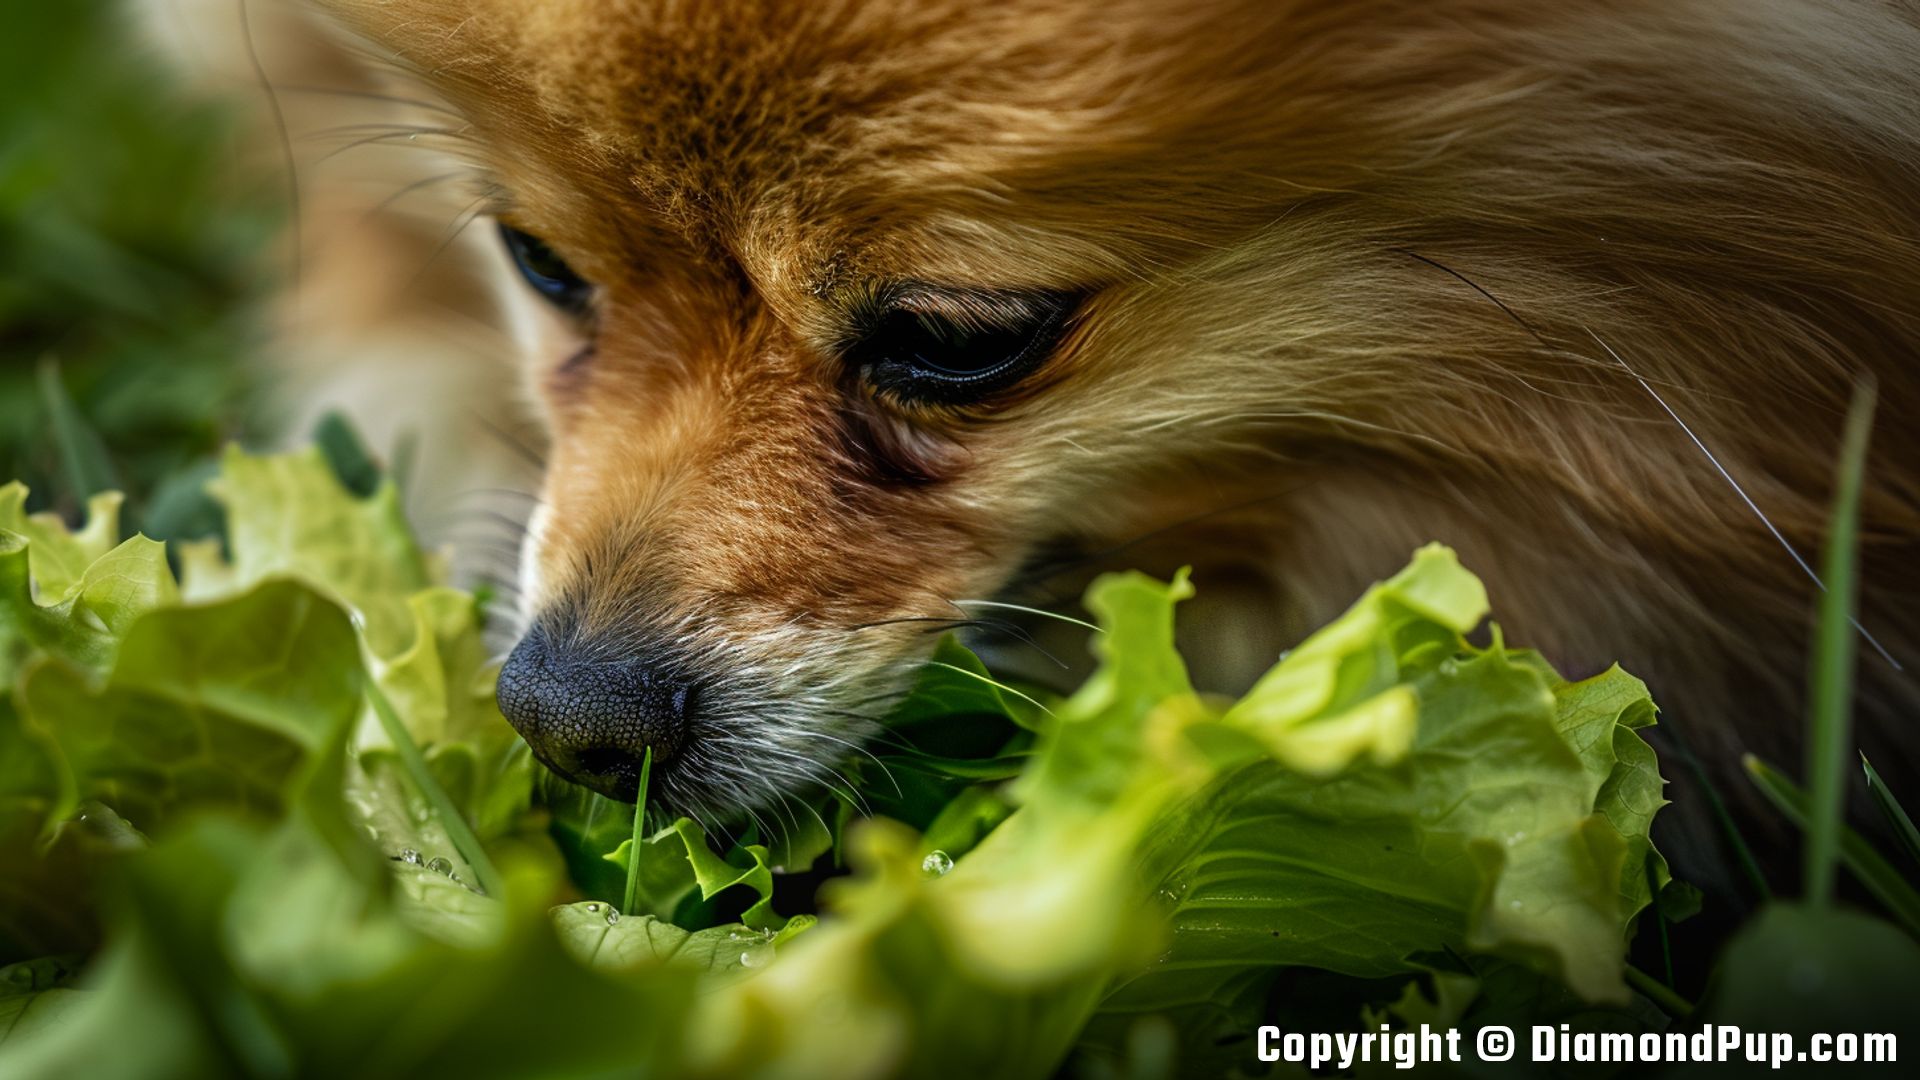 Photograph of a Happy Pomeranian Eating Lettuce